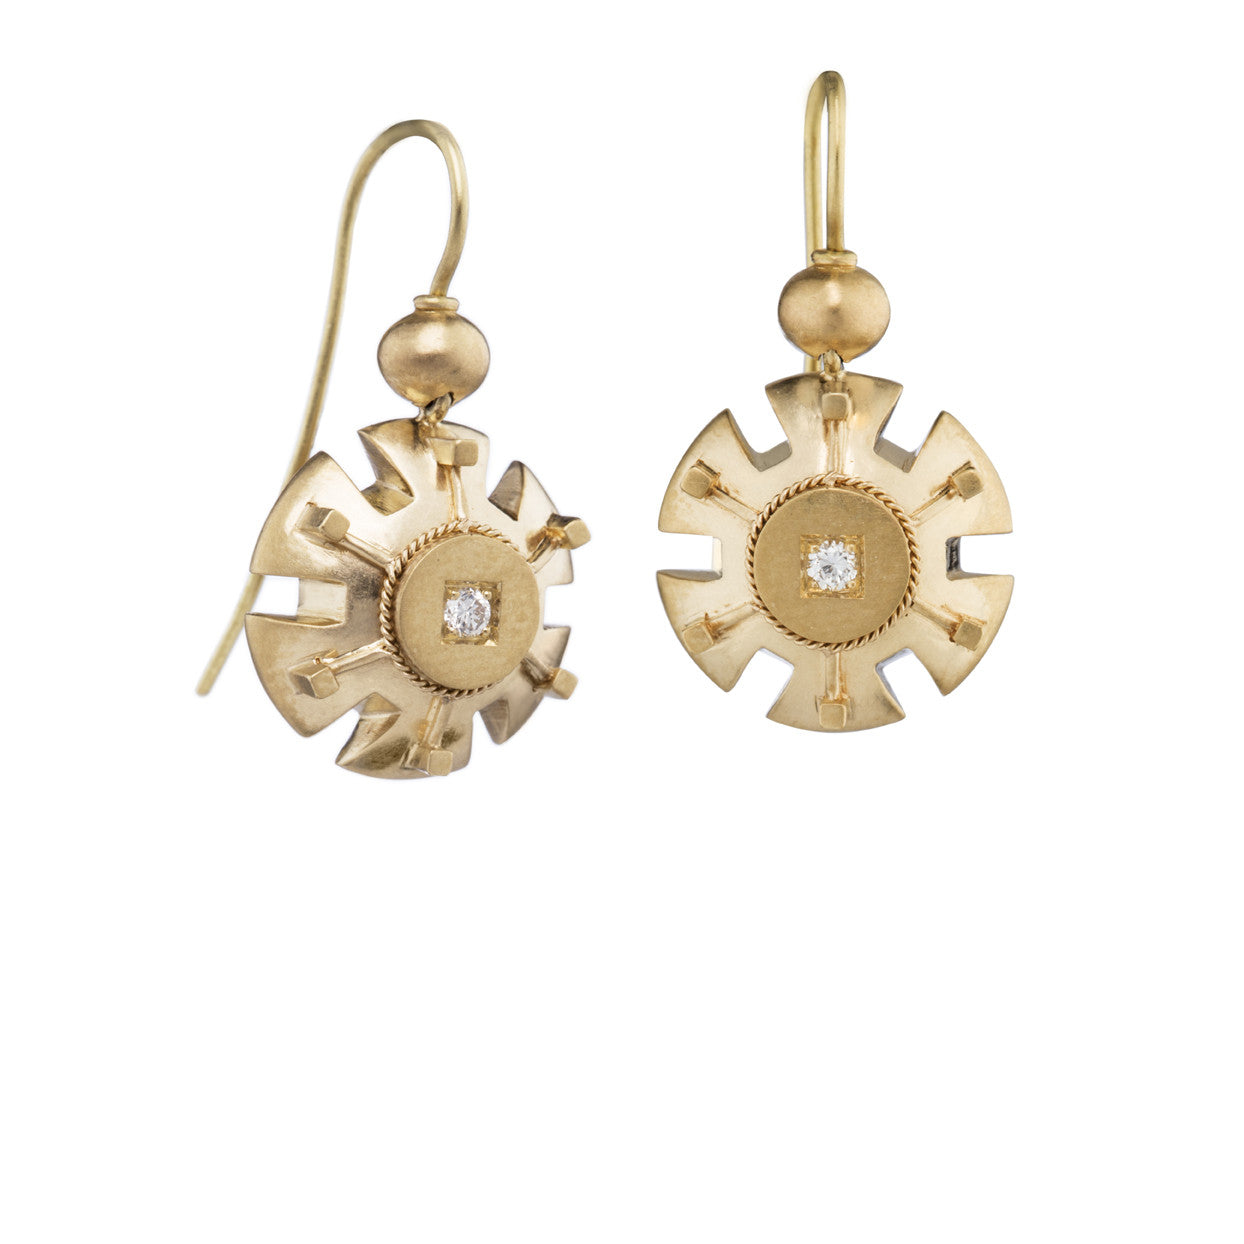 'Minerva' Etruscan Earrings in 18k yellow gold and diamond.